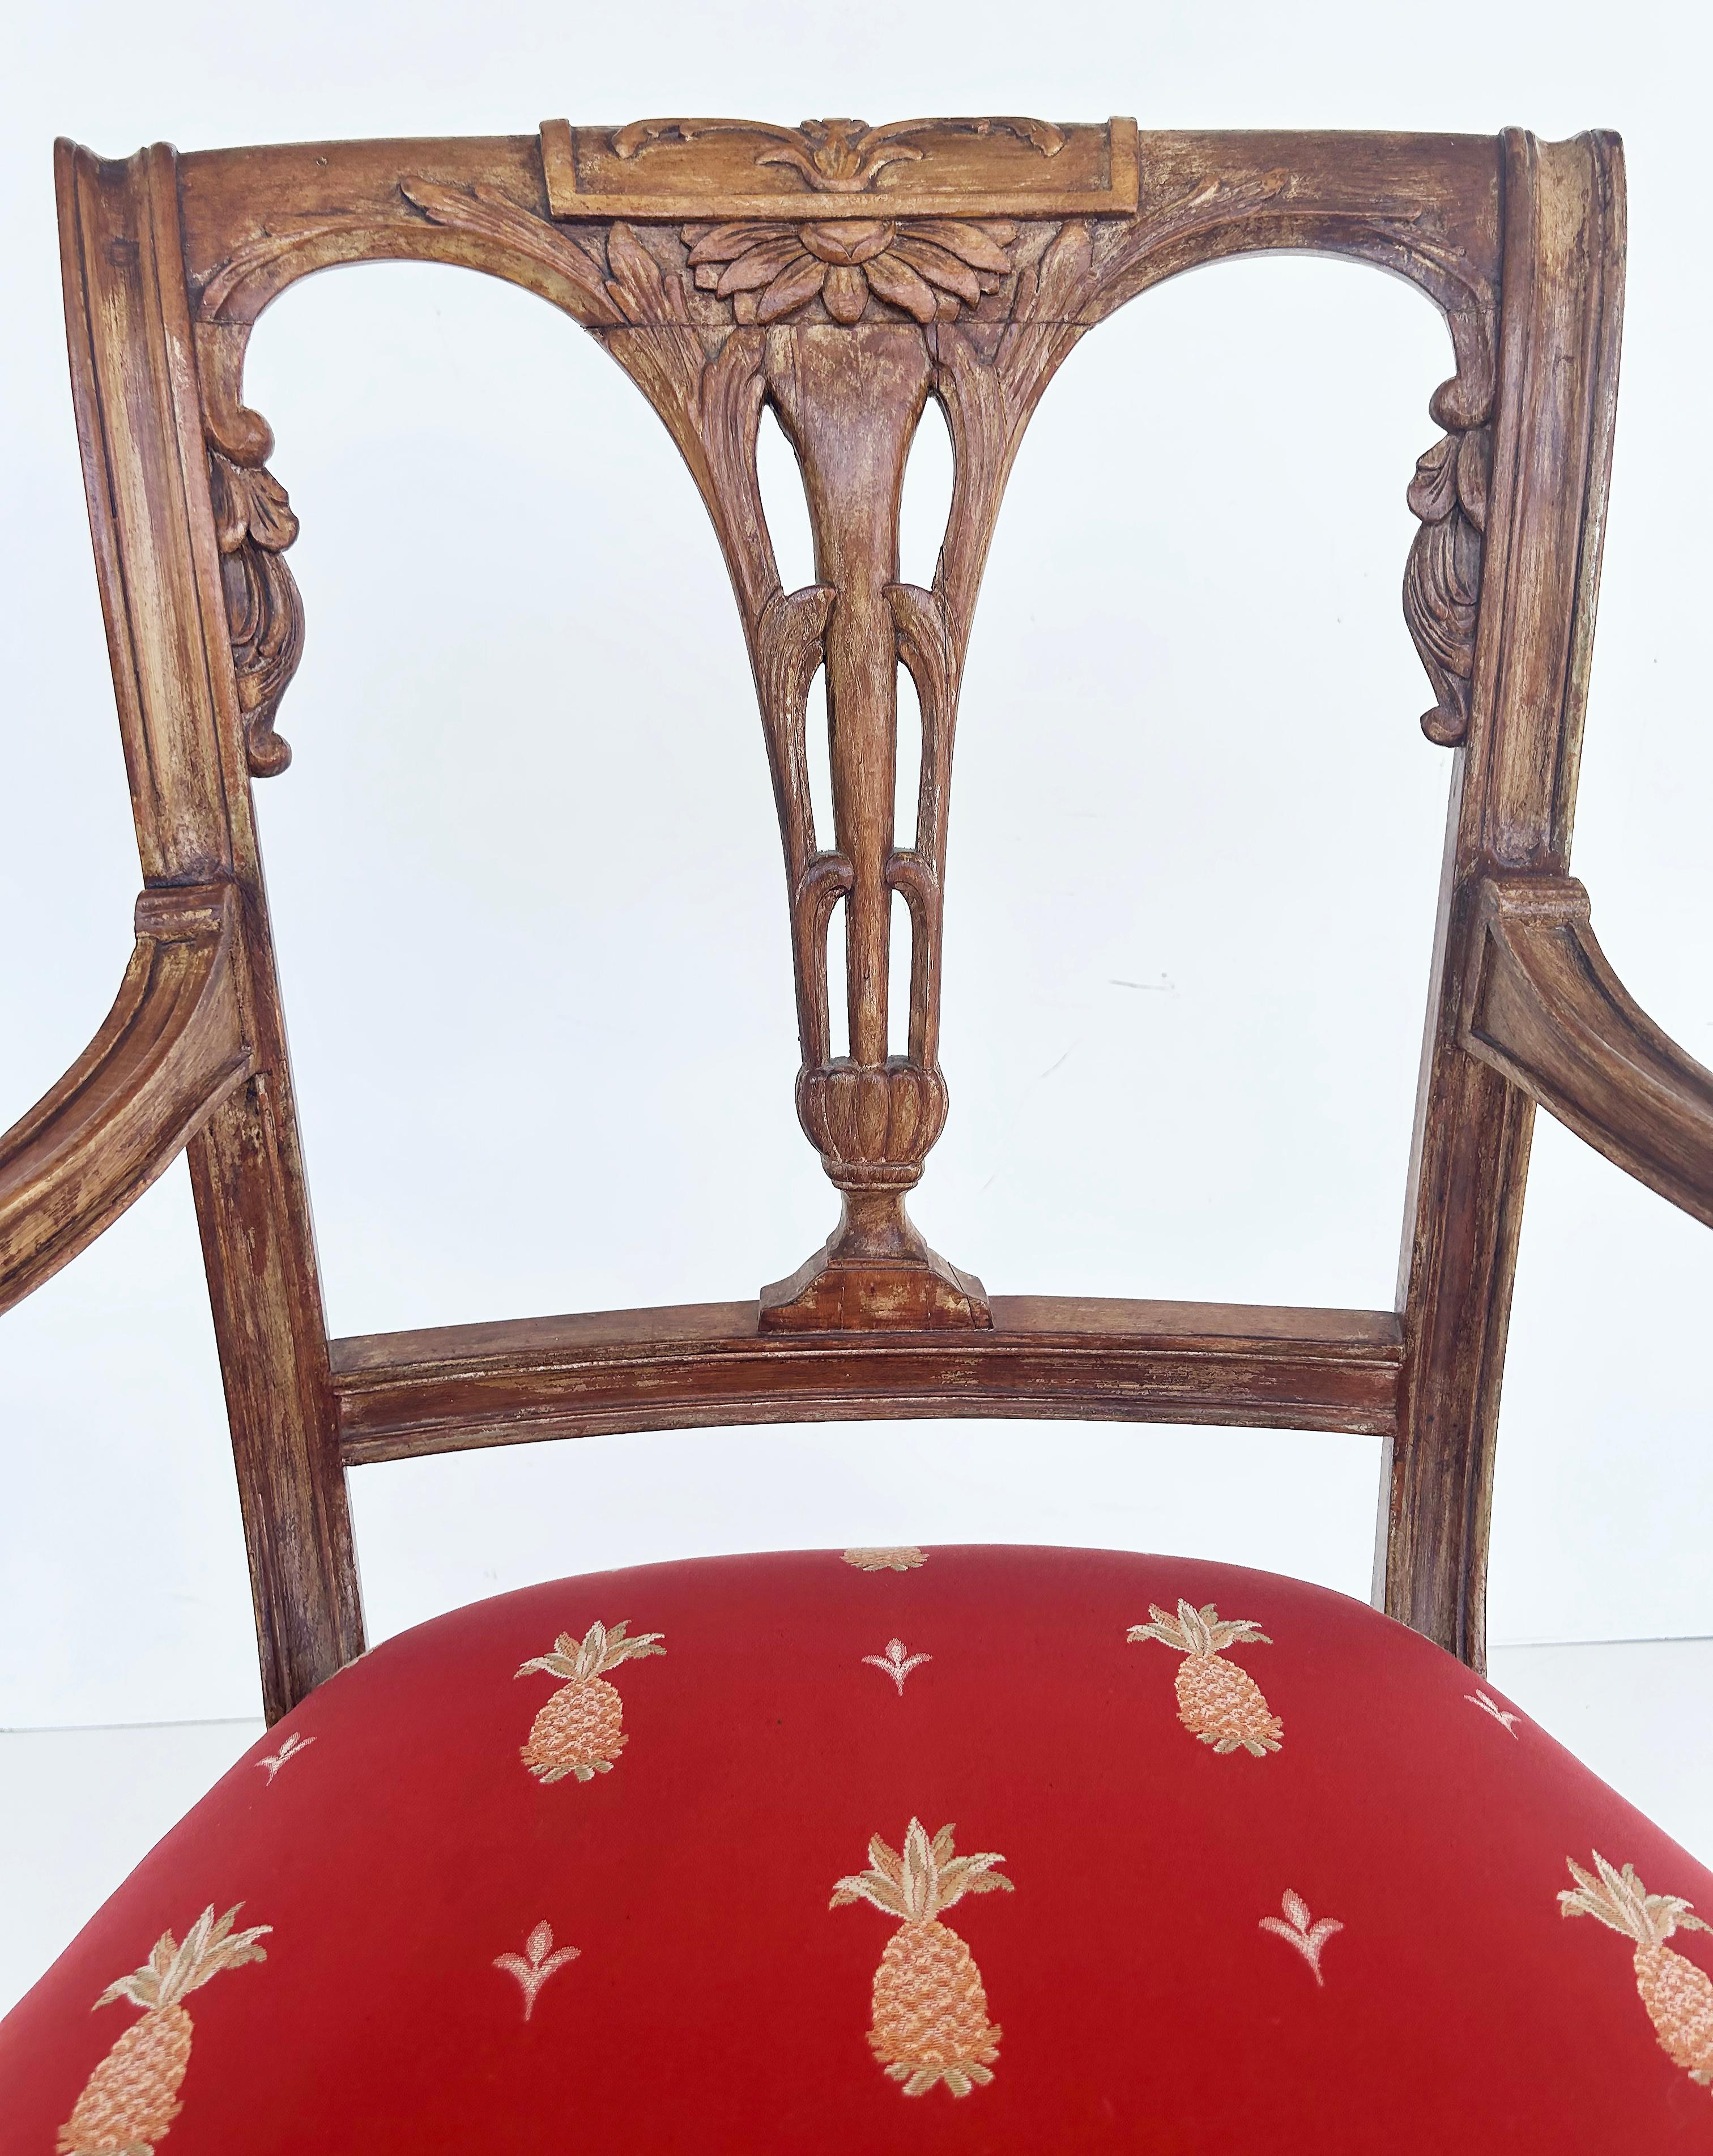 Antique Carved Venetian Plastered Wood Armchairs with Pineapple Seats For Sale 7